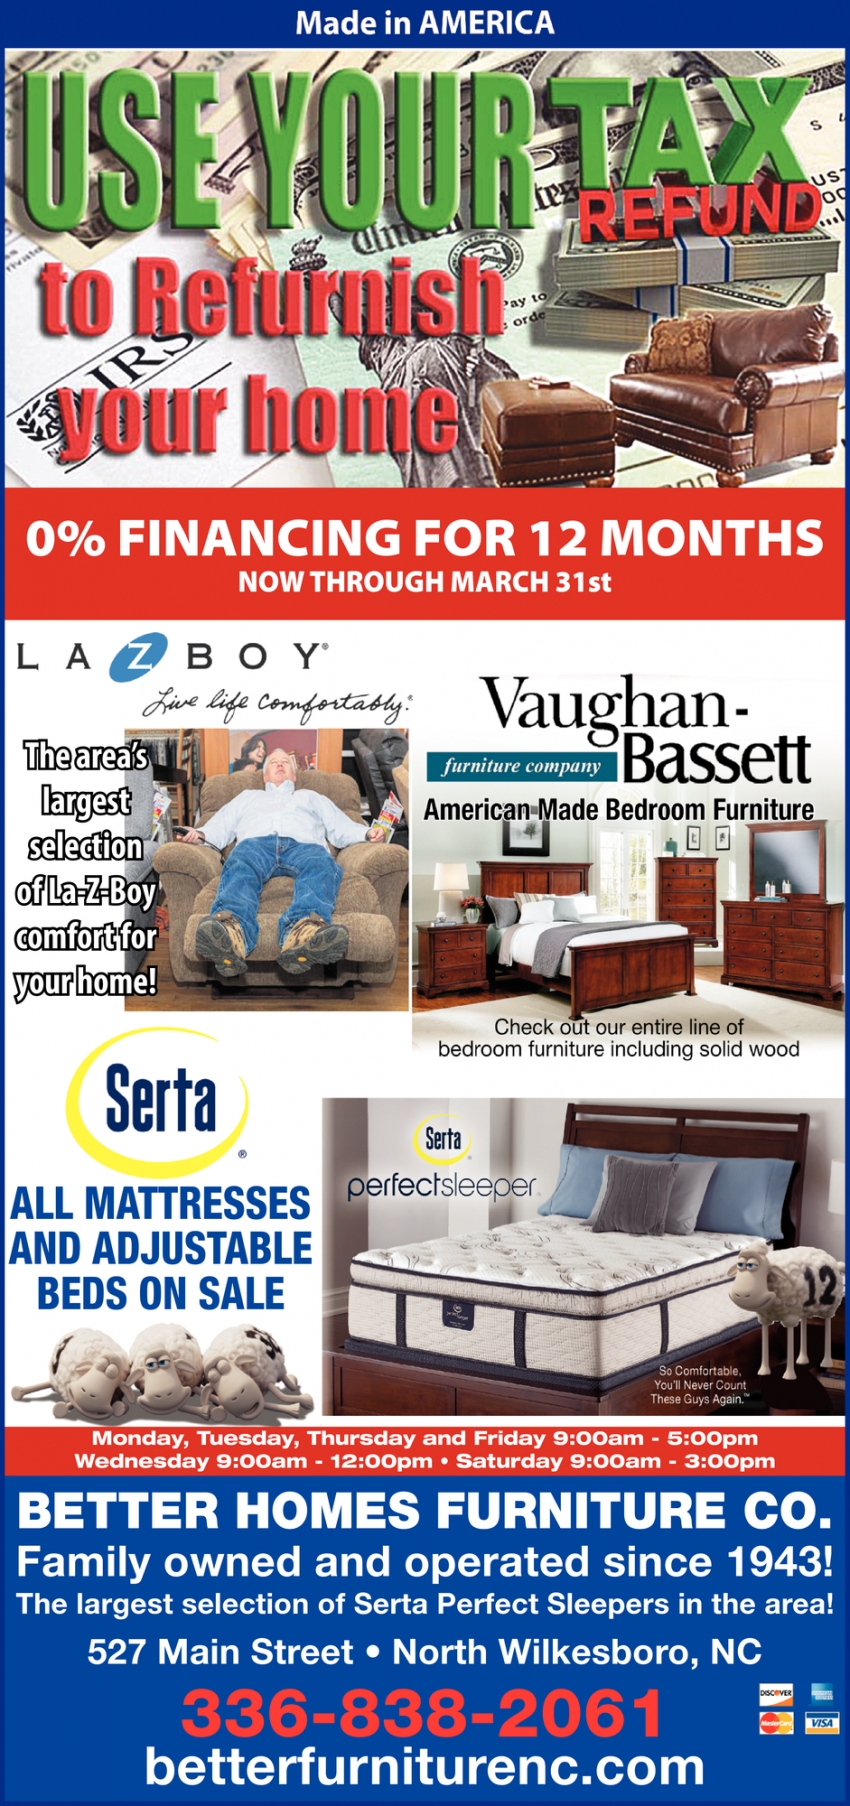 0% Financing For 12 Months